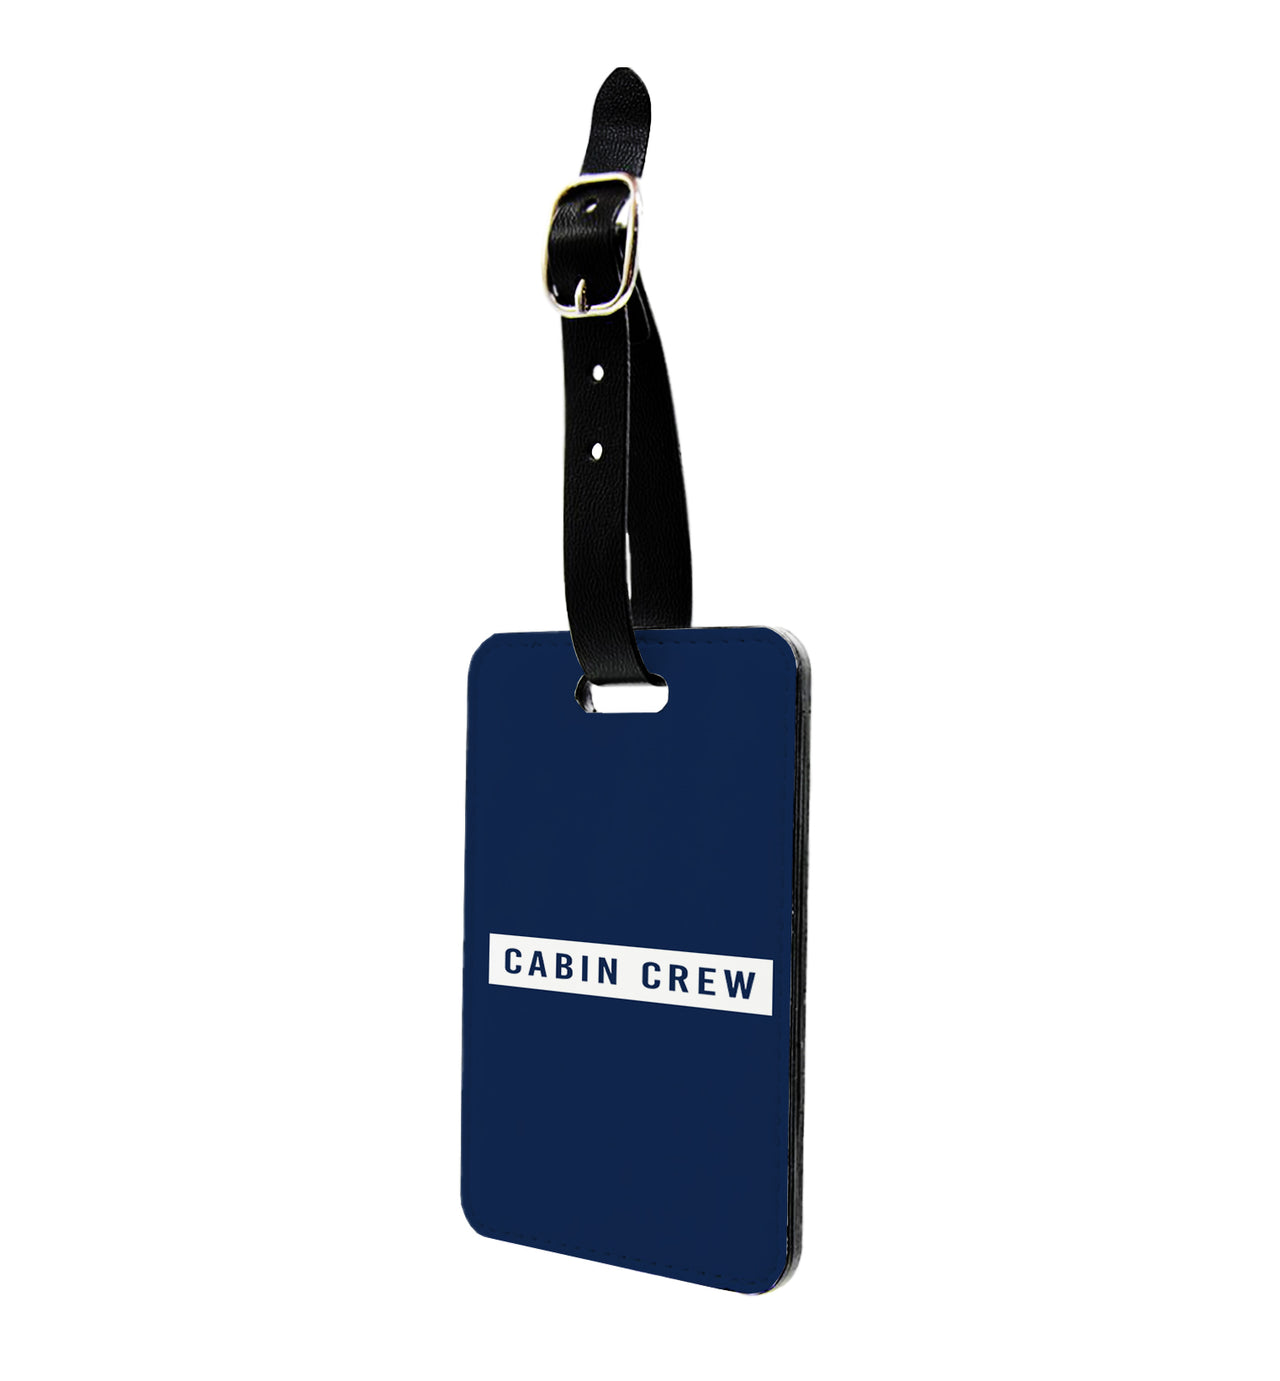 Cabin Crew Text Designed Luggage Tag